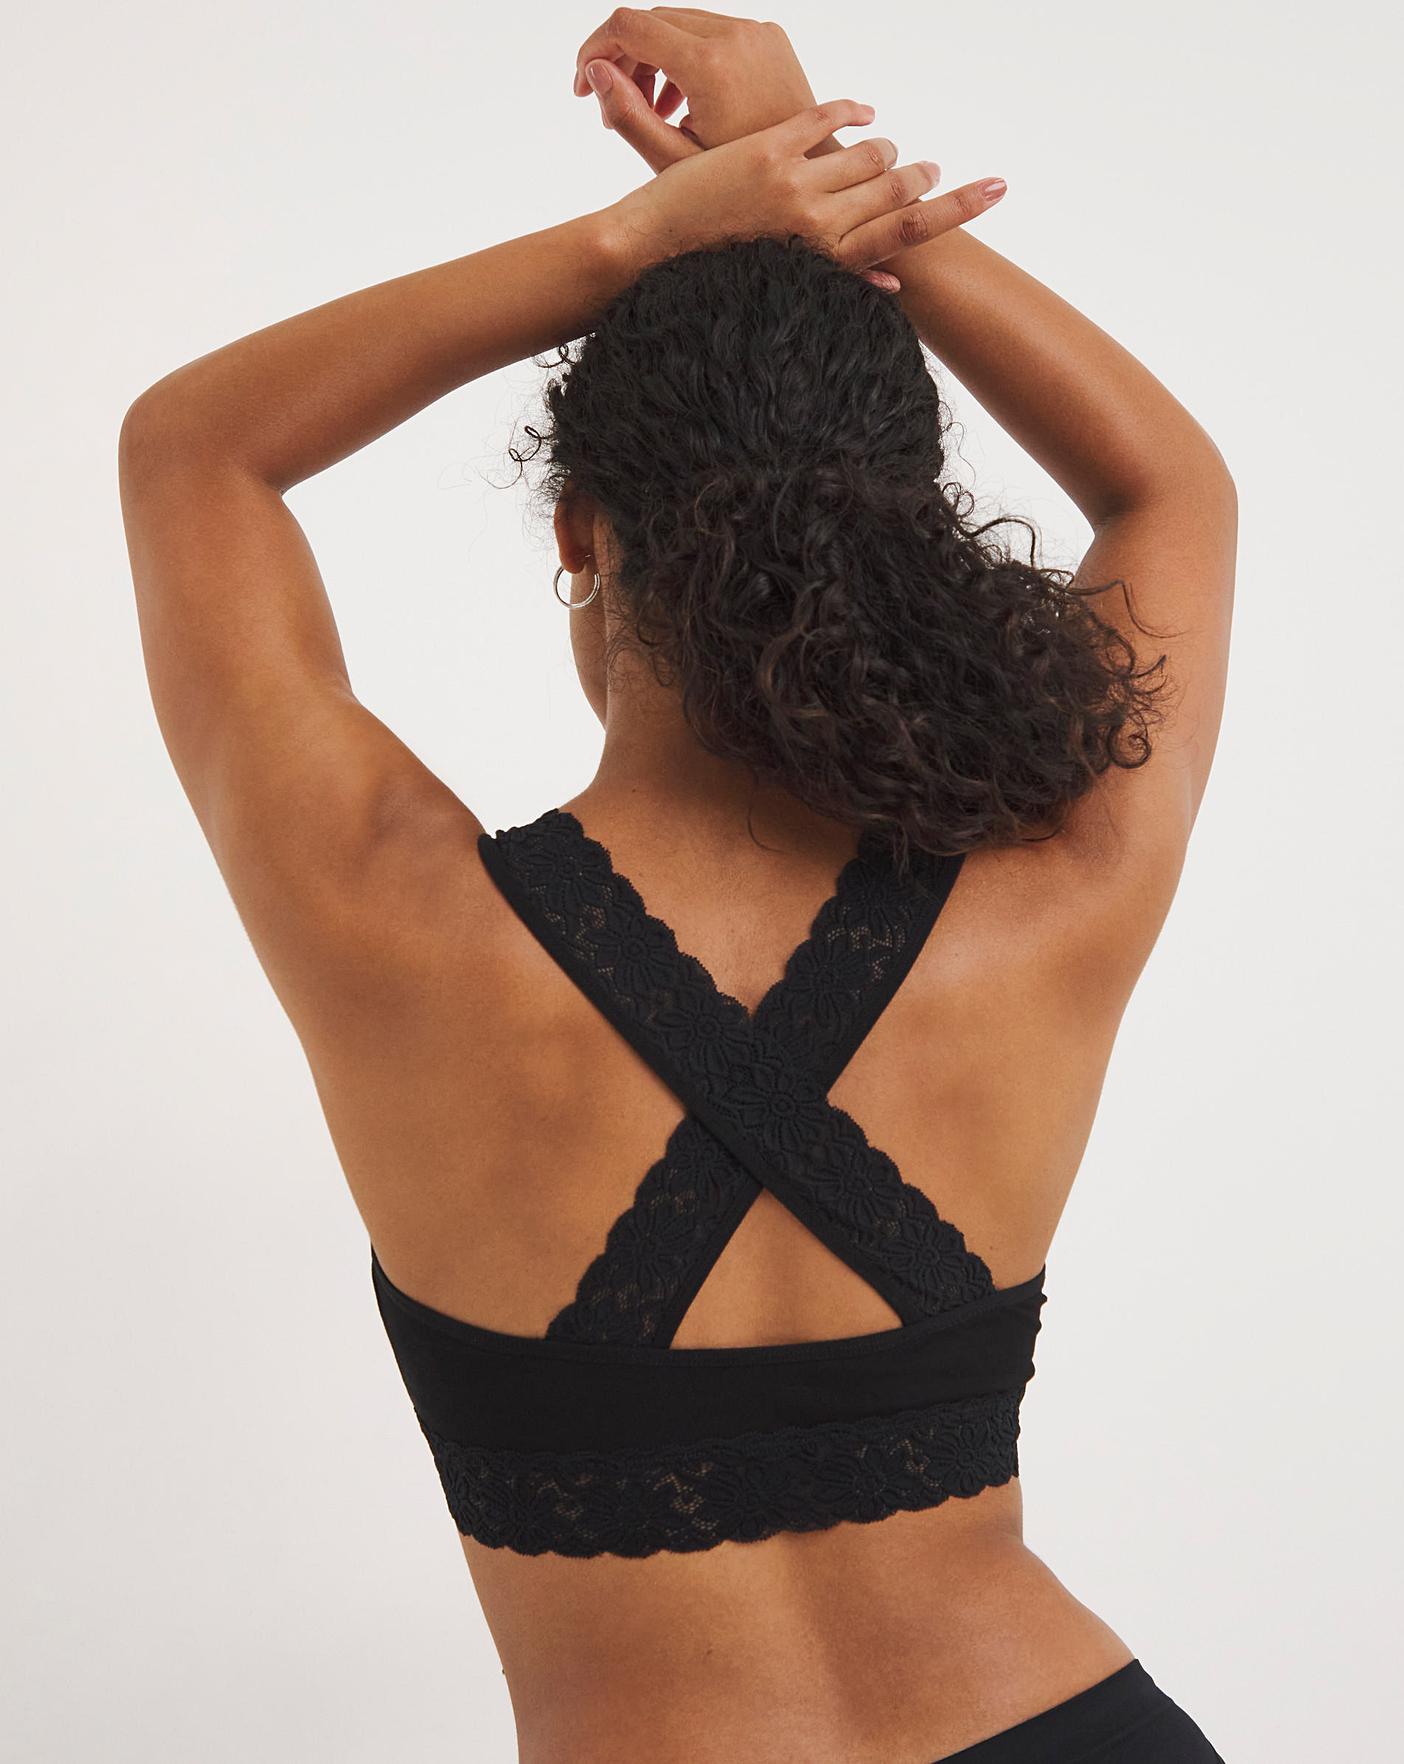 Black Lace Crop Top Bralette with Criss Cross Back